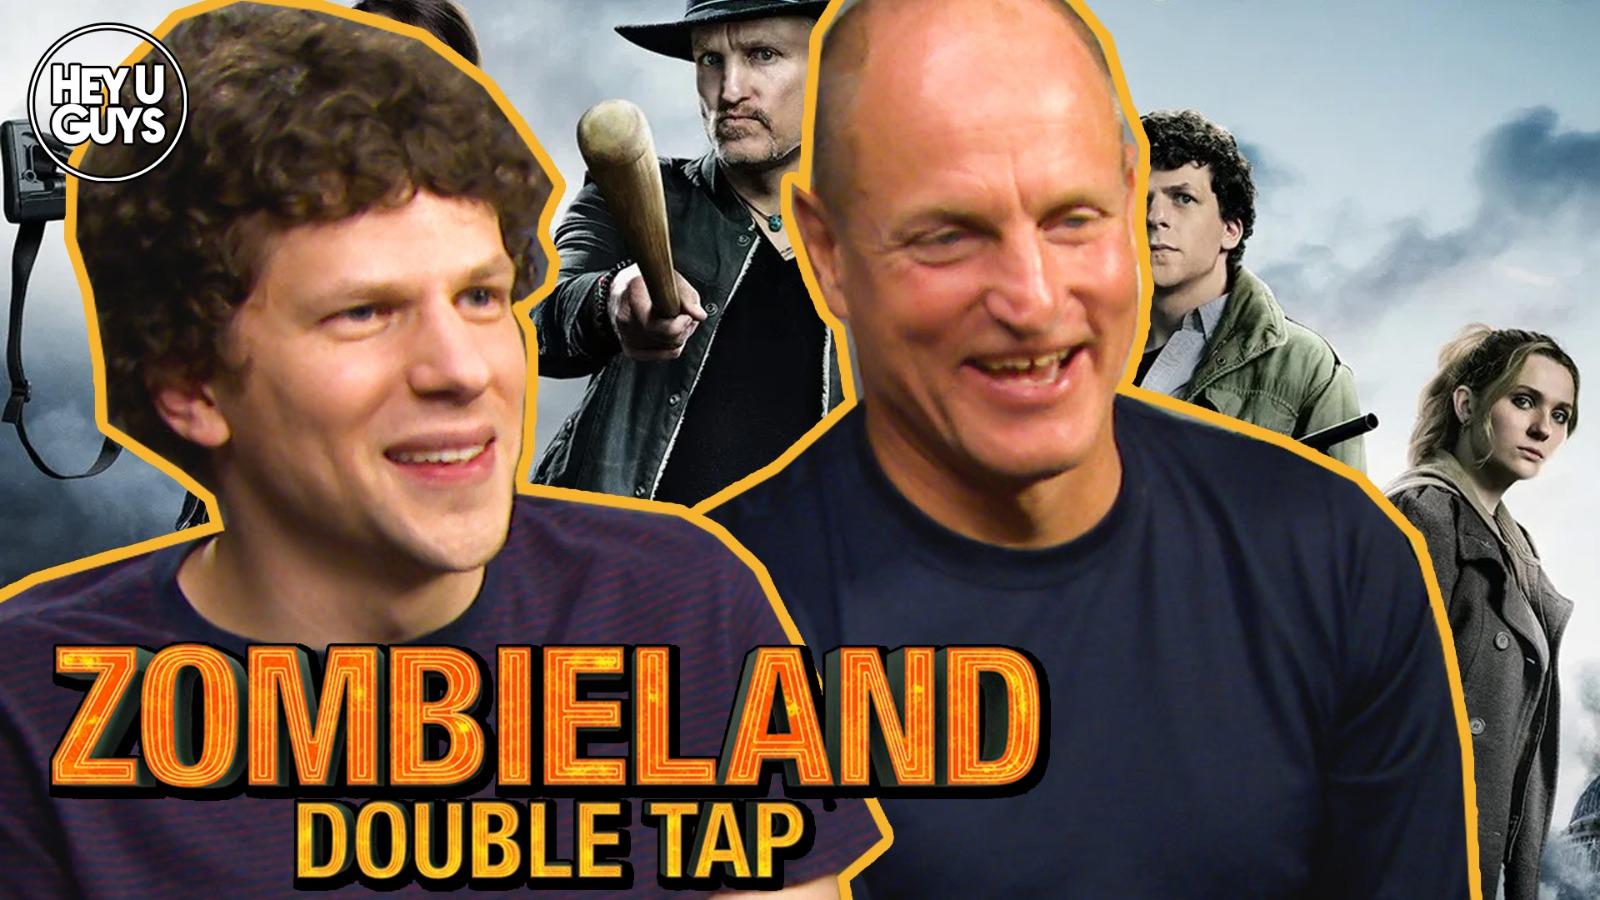 Jesse Eisenberg and Woody Harrelson on Zombieland: Double Tap